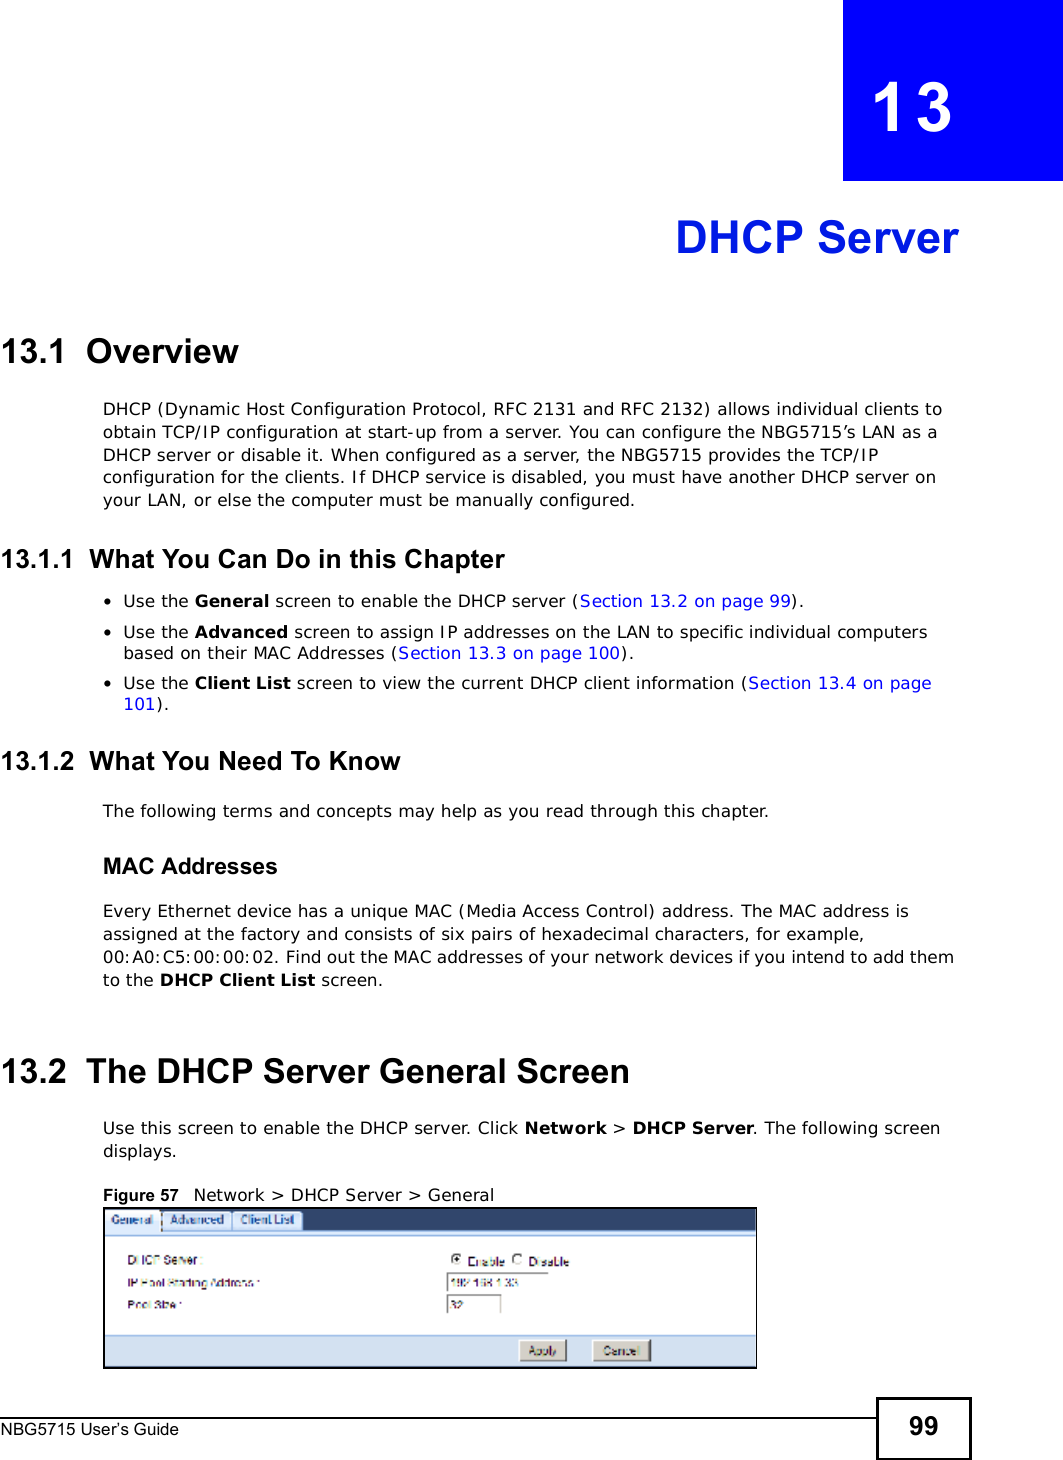 NBG5715 User’s Guide 99CHAPTER   13DHCP Server13.1  OverviewDHCP (Dynamic Host Configuration Protocol, RFC 2131 and RFC 2132) allows individual clients to obtain TCP/IP configuration at start-up from a server. You can configure the NBG5715’s LAN as a DHCP server or disable it. When configured as a server, the NBG5715 provides the TCP/IP configuration for the clients. If DHCP service is disabled, you must have another DHCP server on your LAN, or else the computer must be manually configured.13.1.1  What You Can Do in this Chapter•Use the General screen to enable the DHCP server (Section 13.2 on page 99).•Use the Advanced screen to assign IP addresses on the LAN to specific individual computers based on their MAC Addresses (Section 13.3 on page 100).•Use the Client List screen to view the current DHCP client information (Section 13.4 on page 101).13.1.2  What You Need To KnowThe following terms and concepts may help as you read through this chapter.MAC AddressesEvery Ethernet device has a unique MAC (Media Access Control) address. The MAC address is assigned at the factory and consists of six pairs of hexadecimal characters, for example, 00:A0:C5:00:00:02. Find out the MAC addresses of your network devices if you intend to add them to the DHCP Client List screen.13.2  The DHCP Server General ScreenUse this screen to enable the DHCP server. Click Network &gt; DHCP Server.The following screen displays.Figure 57   Network &gt; DHCP Server &gt; General   